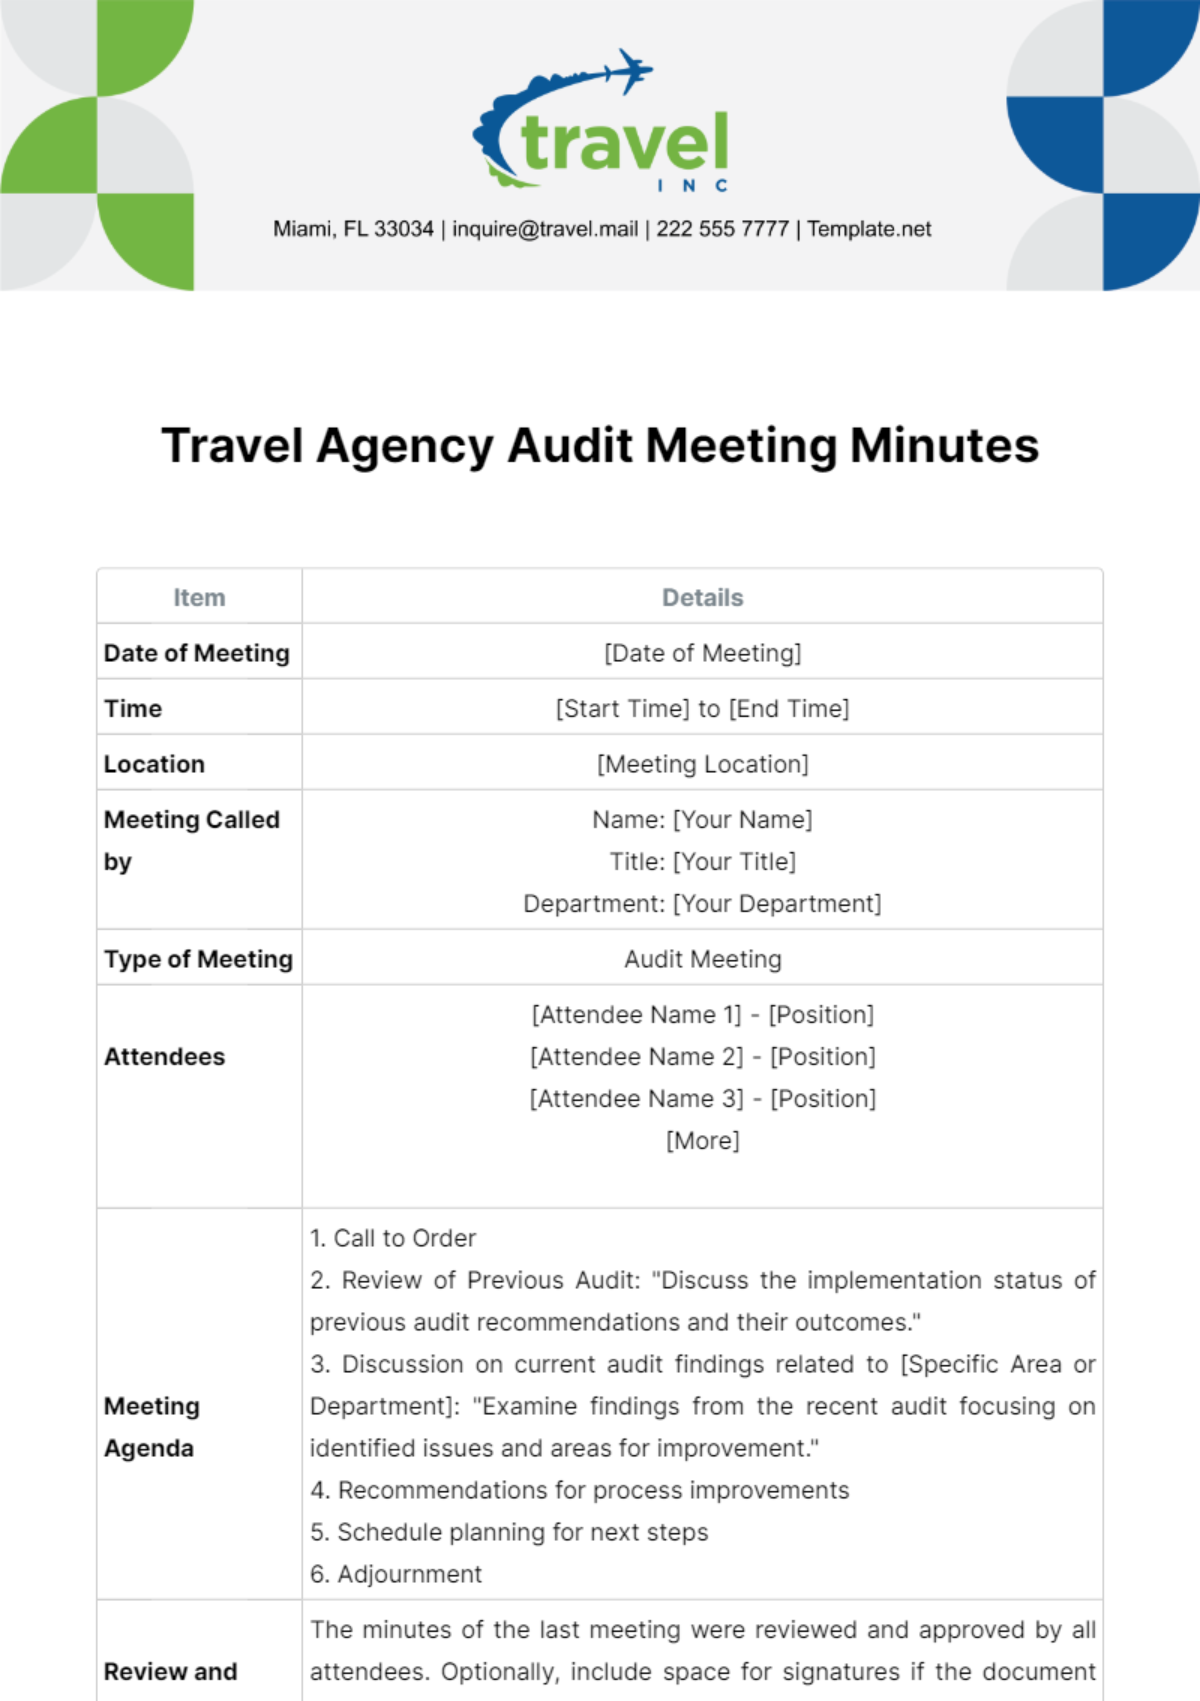 Travel Agency Audit Meeting Minutes Template